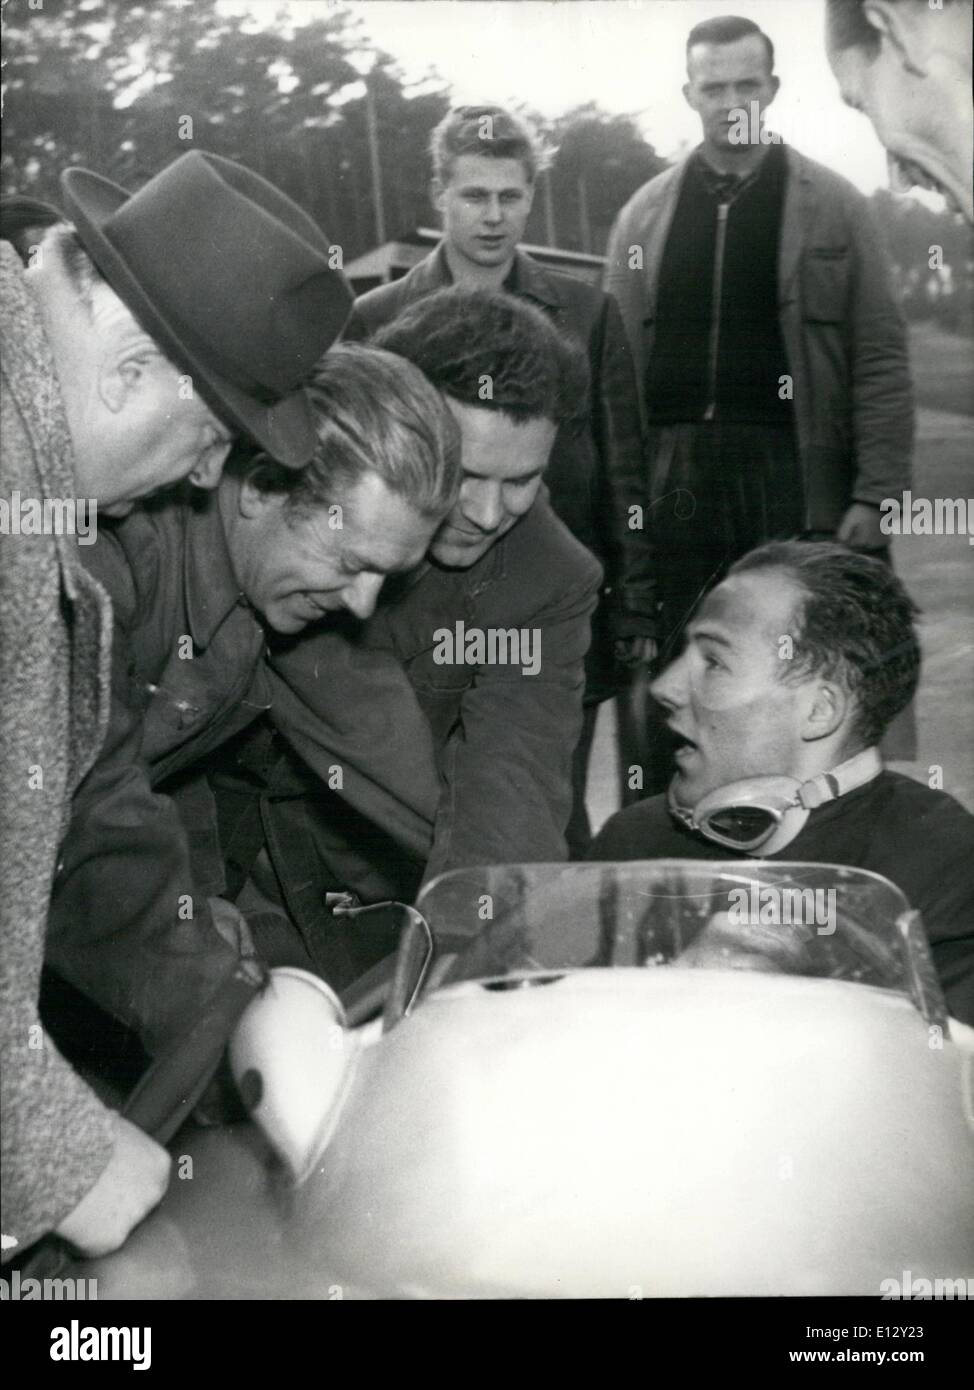 Feb. 26, 2012 - Moss trains again on the ''Silberpfeil''; The English race see Stirling Moss trains on the Hockenheim-Ring with Stock Photo